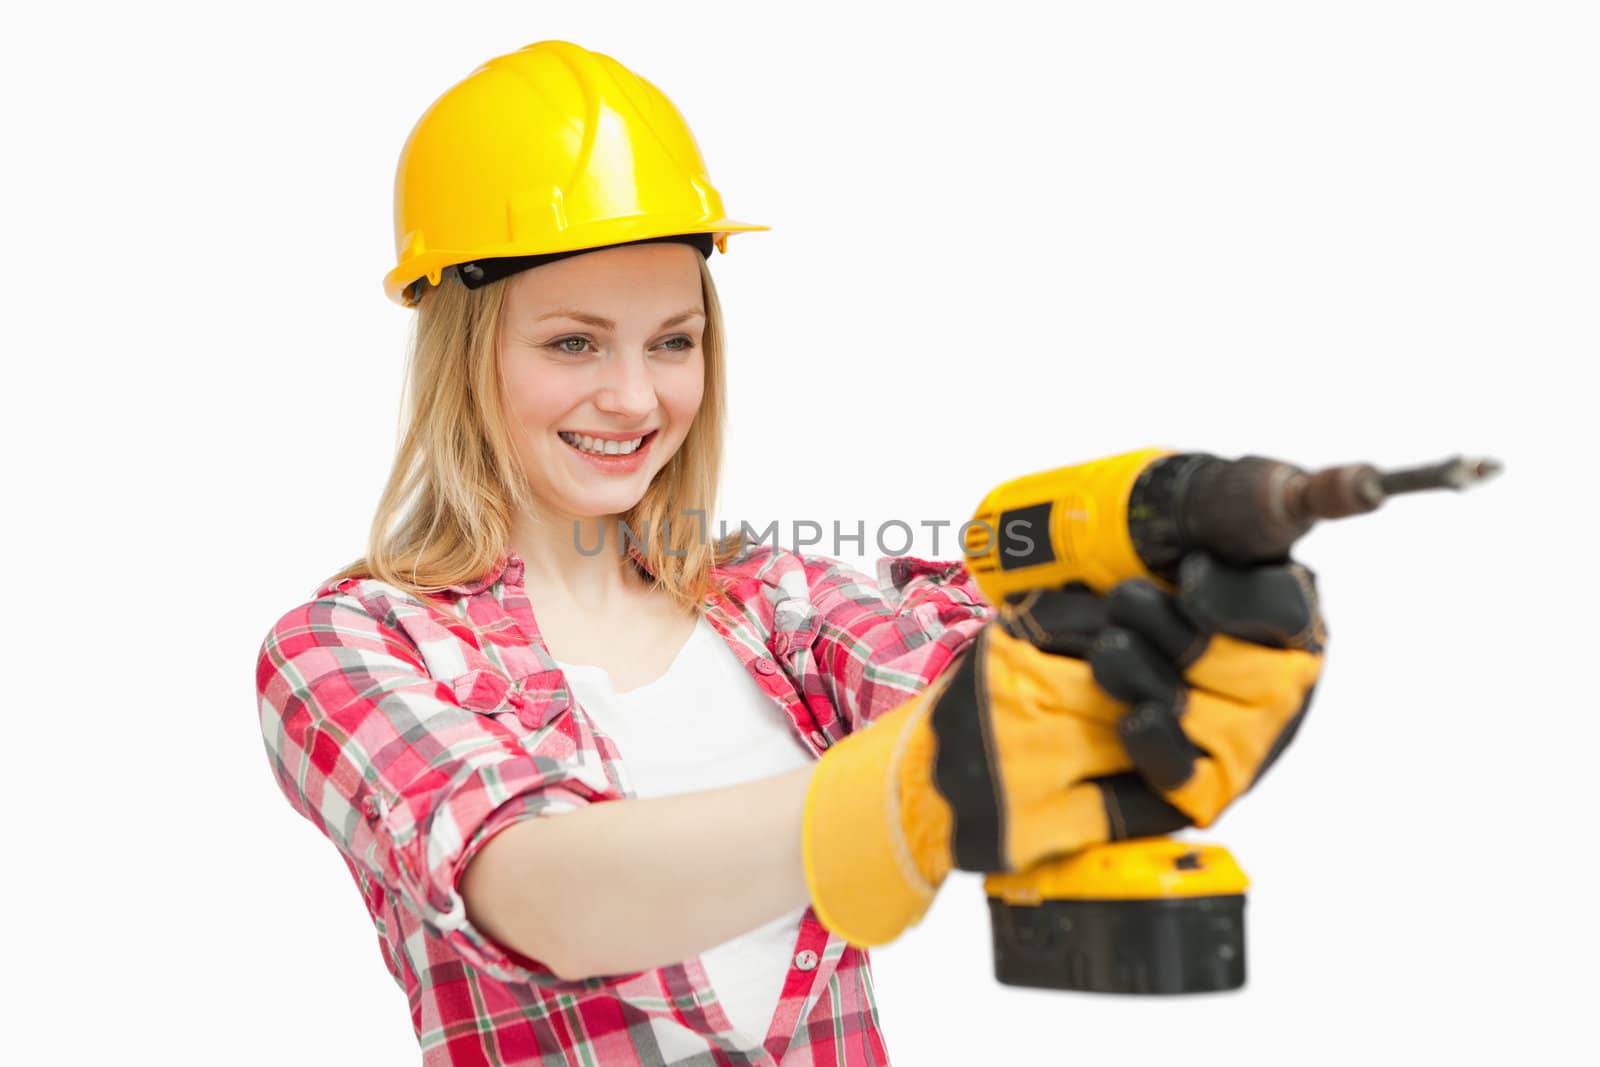 Joyful woman using an electric screwdriver against white background